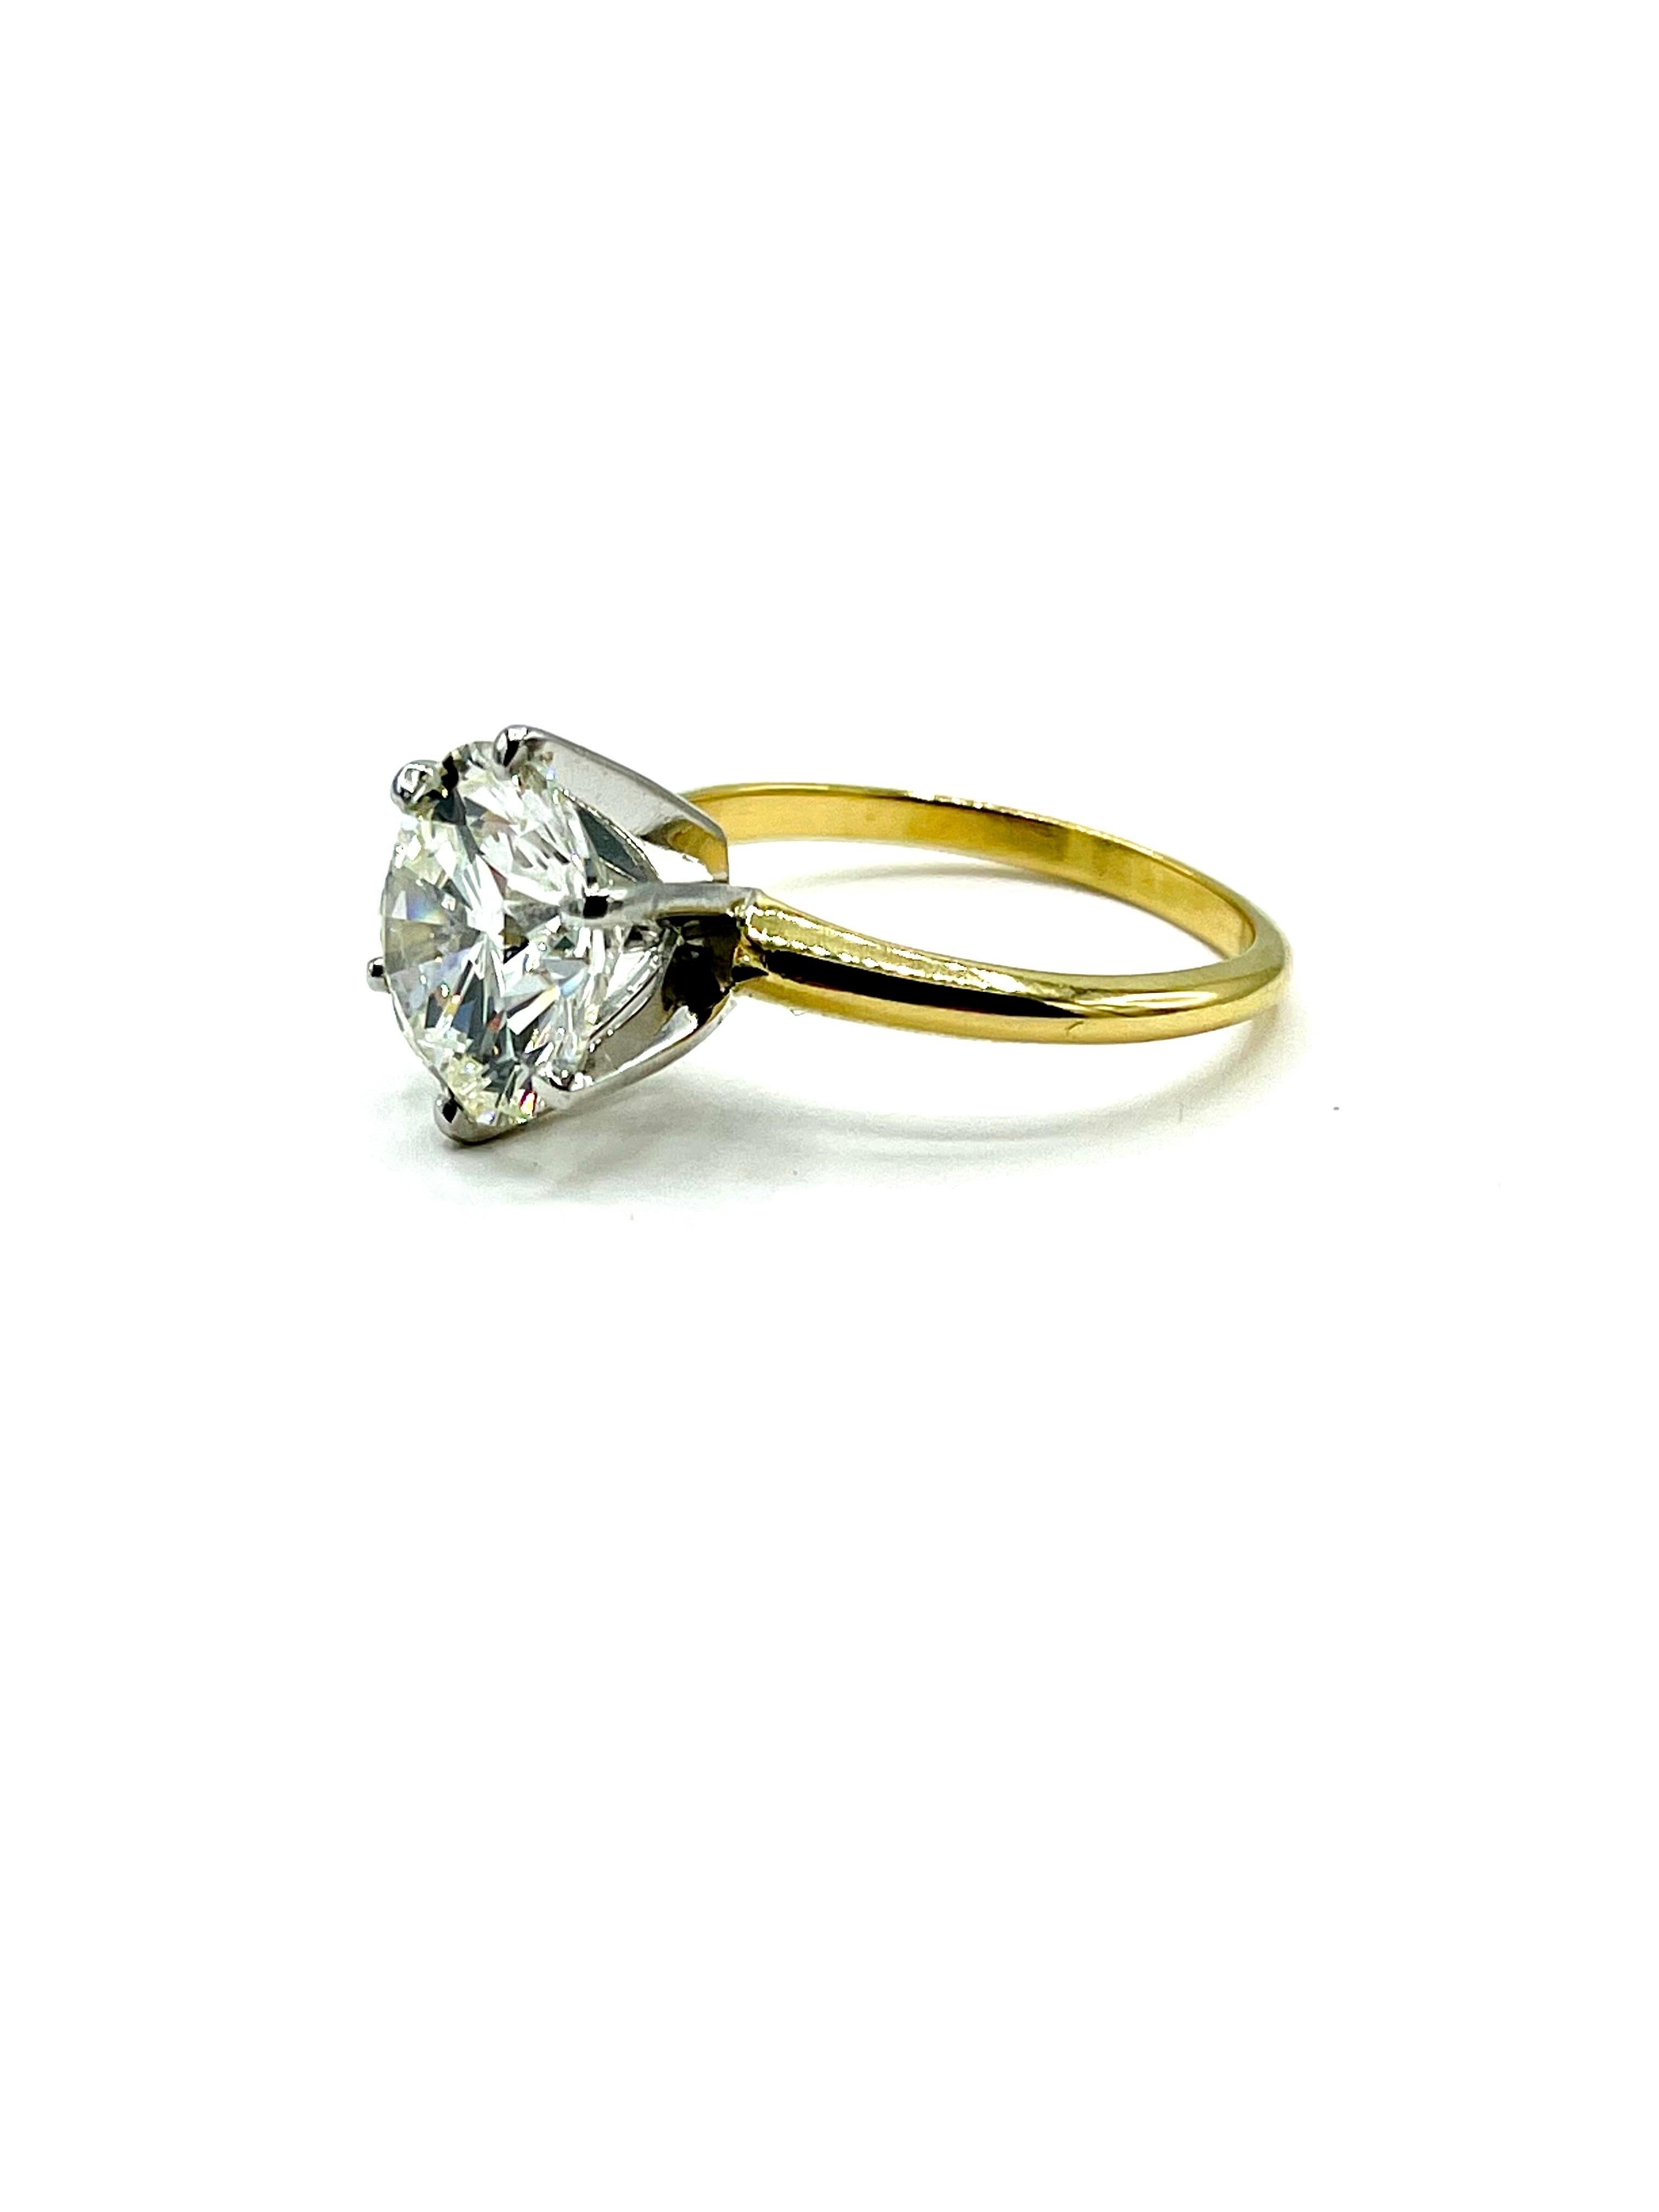 4.48 Carat Round Brilliant Diamond 18K and Platinum Ring In Excellent Condition For Sale In Chevy Chase, MD